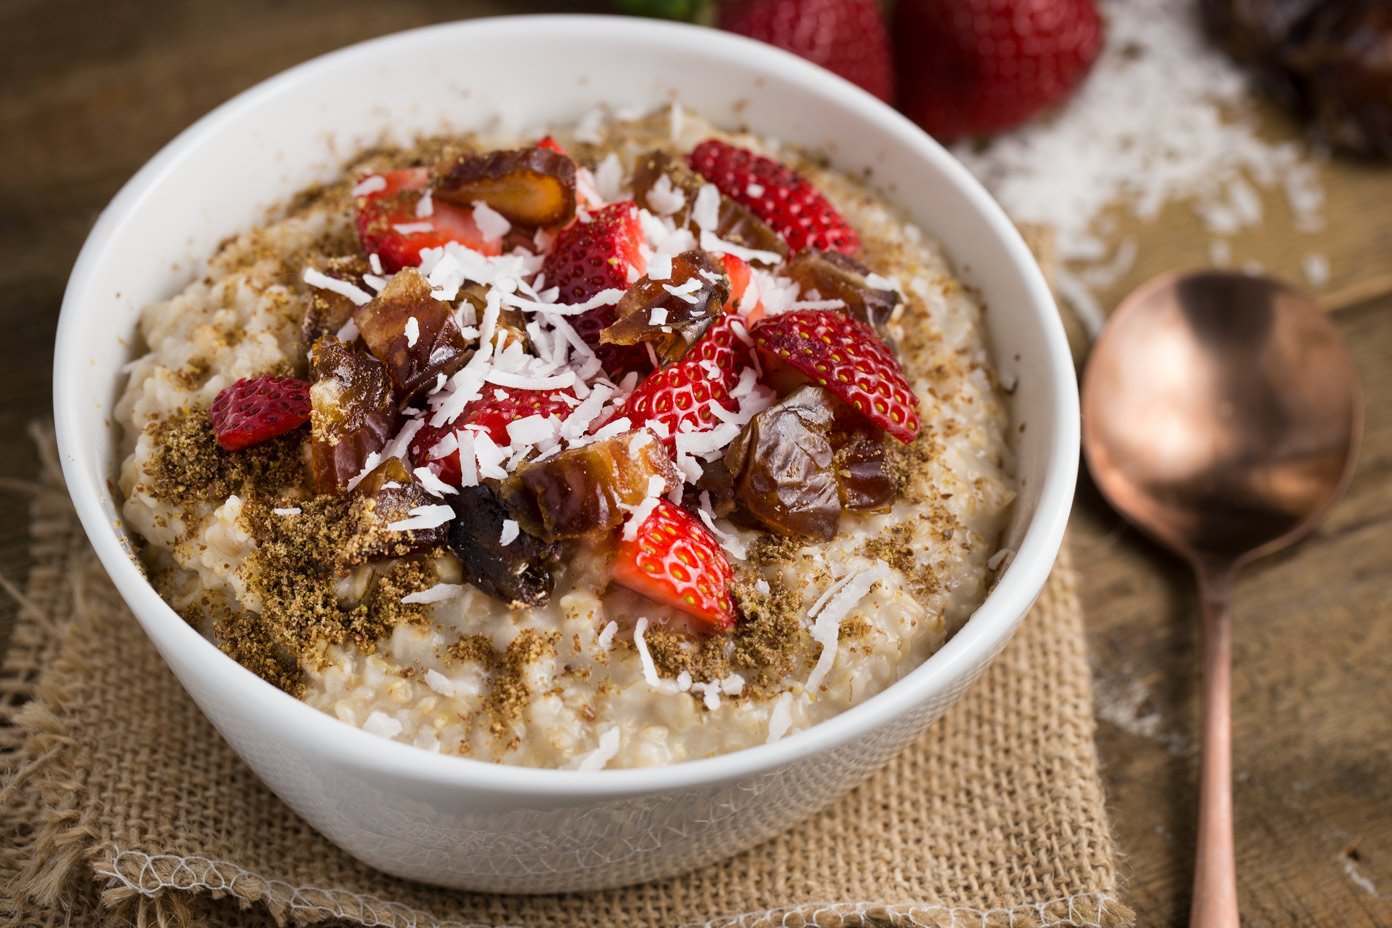 Is Oatmeal Good For Your Health?